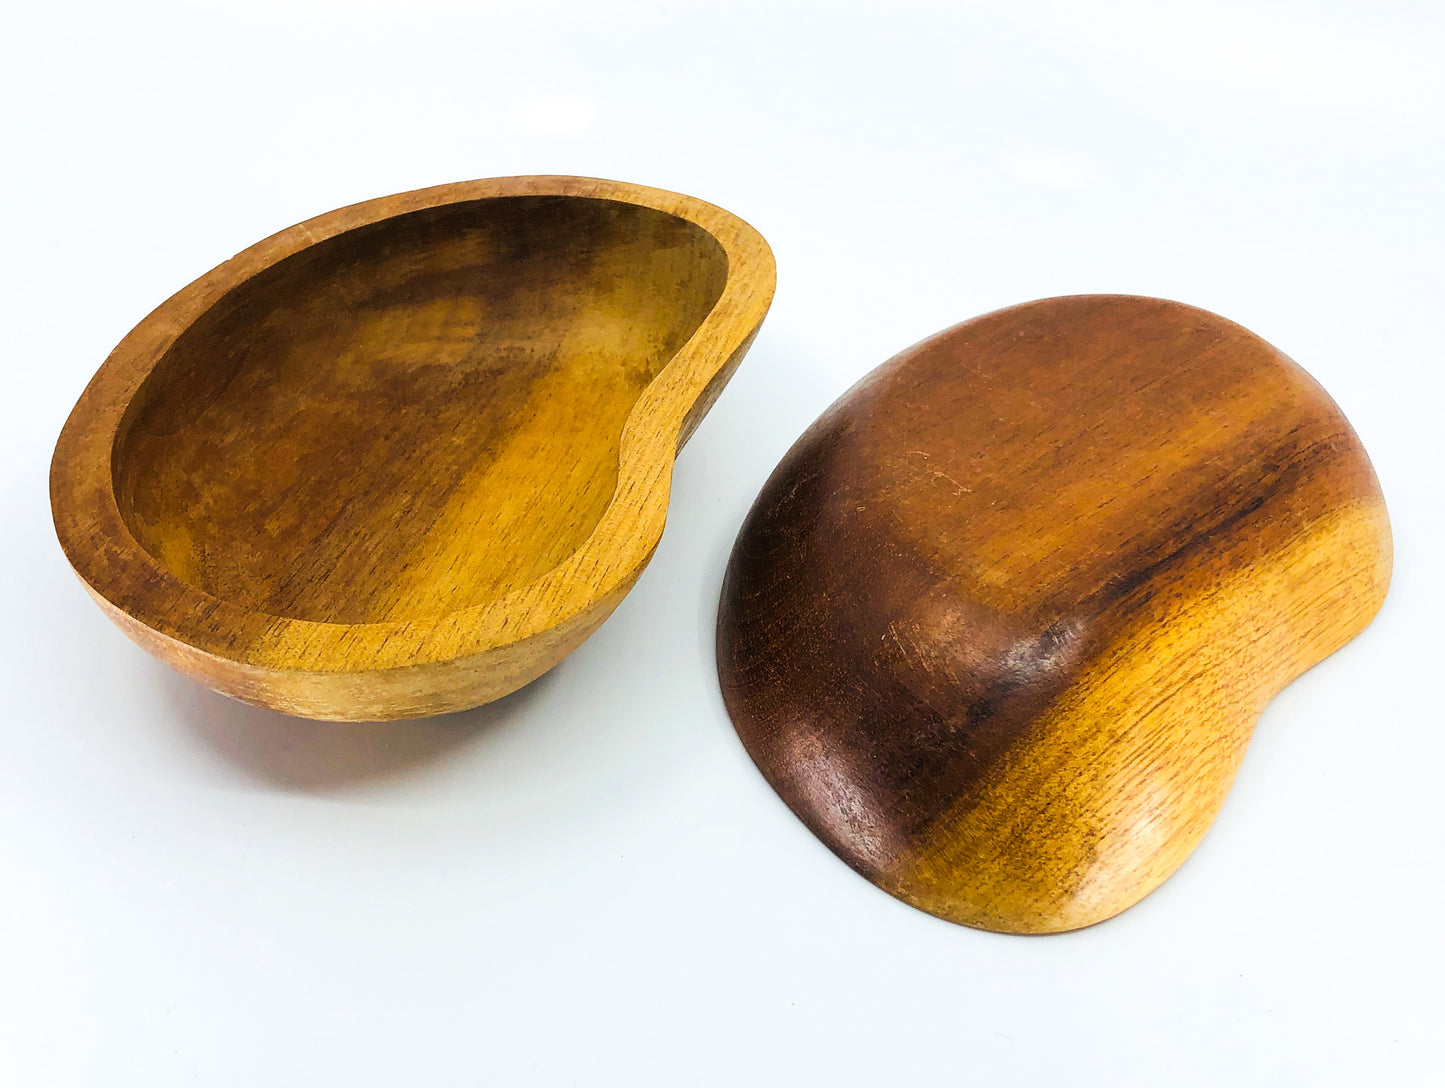 S/2 Monkey Pod Wood Kidney Shaped Bowls / Catch All, 1 Available